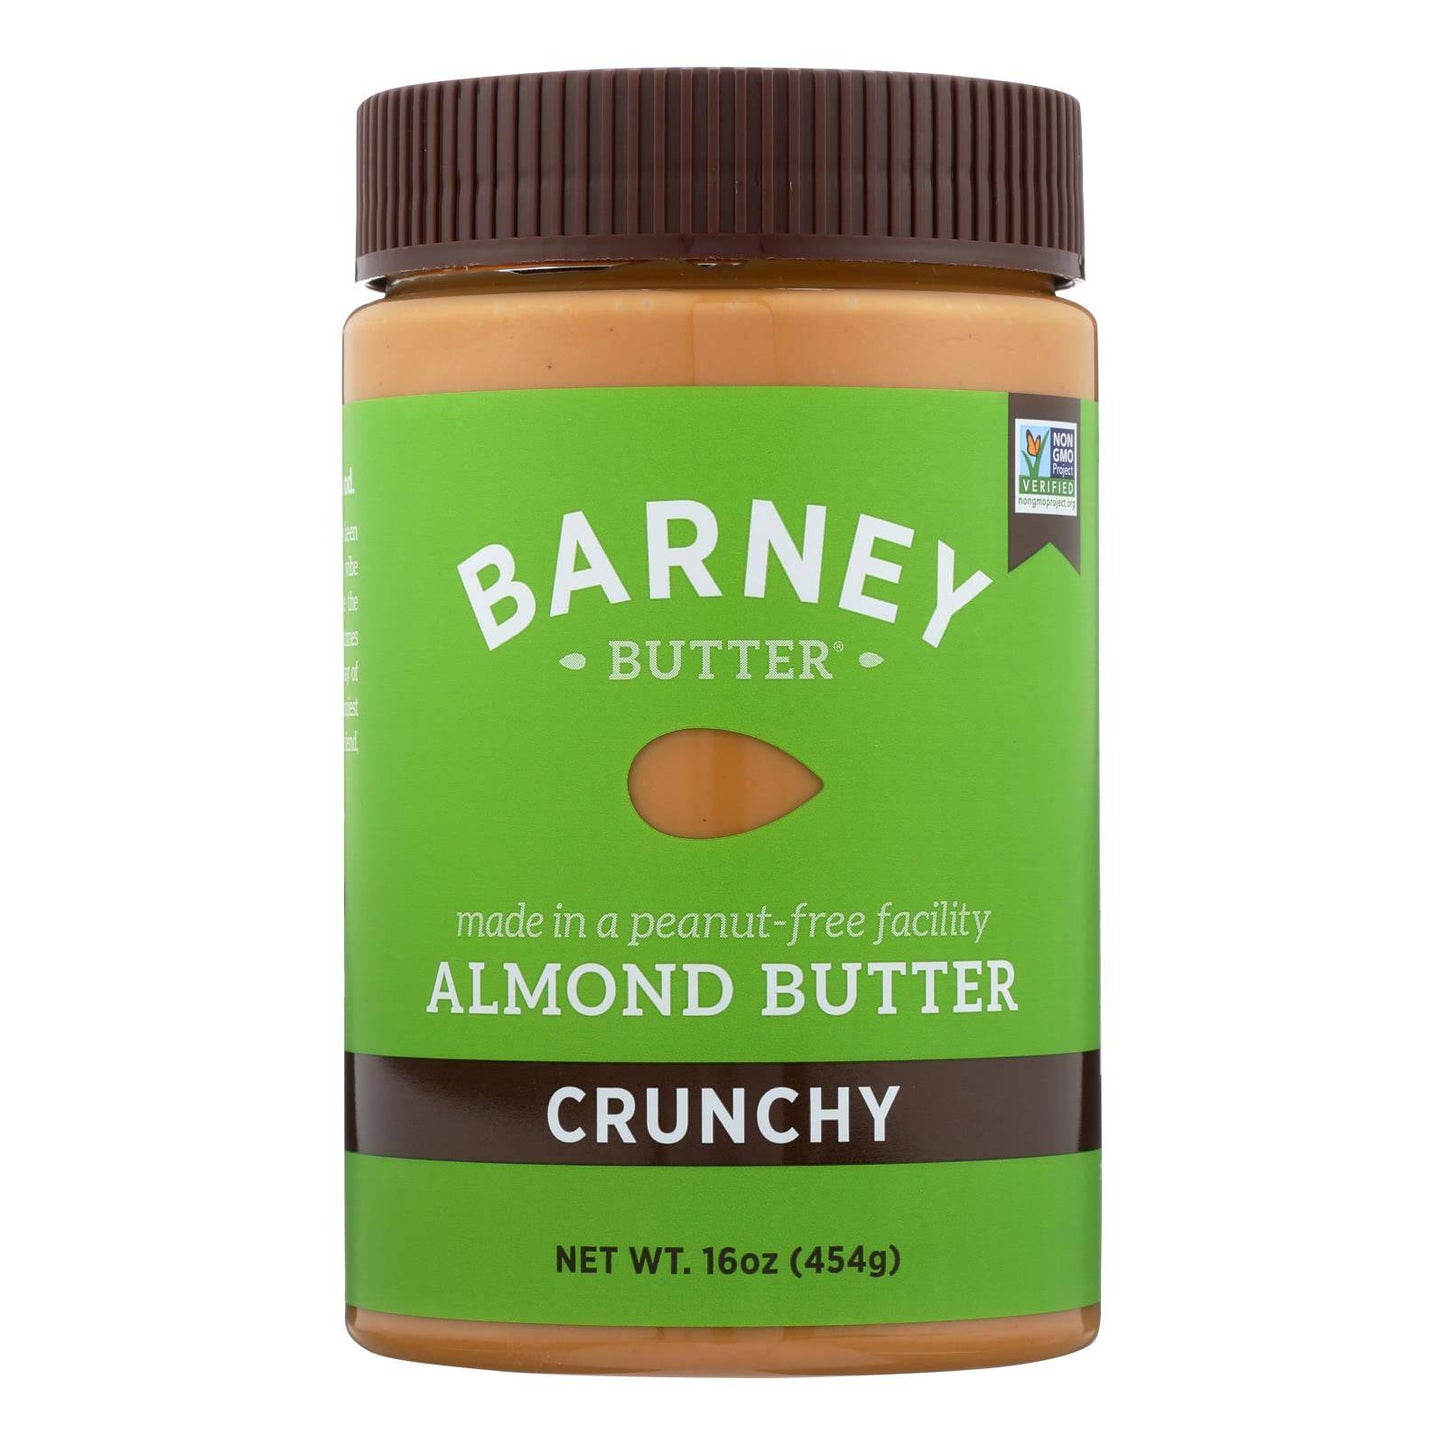 Buy Barney Butter - Almond Butter - Crunchy - Case Of 6 - 16 Oz.  at OnlyNaturals.us